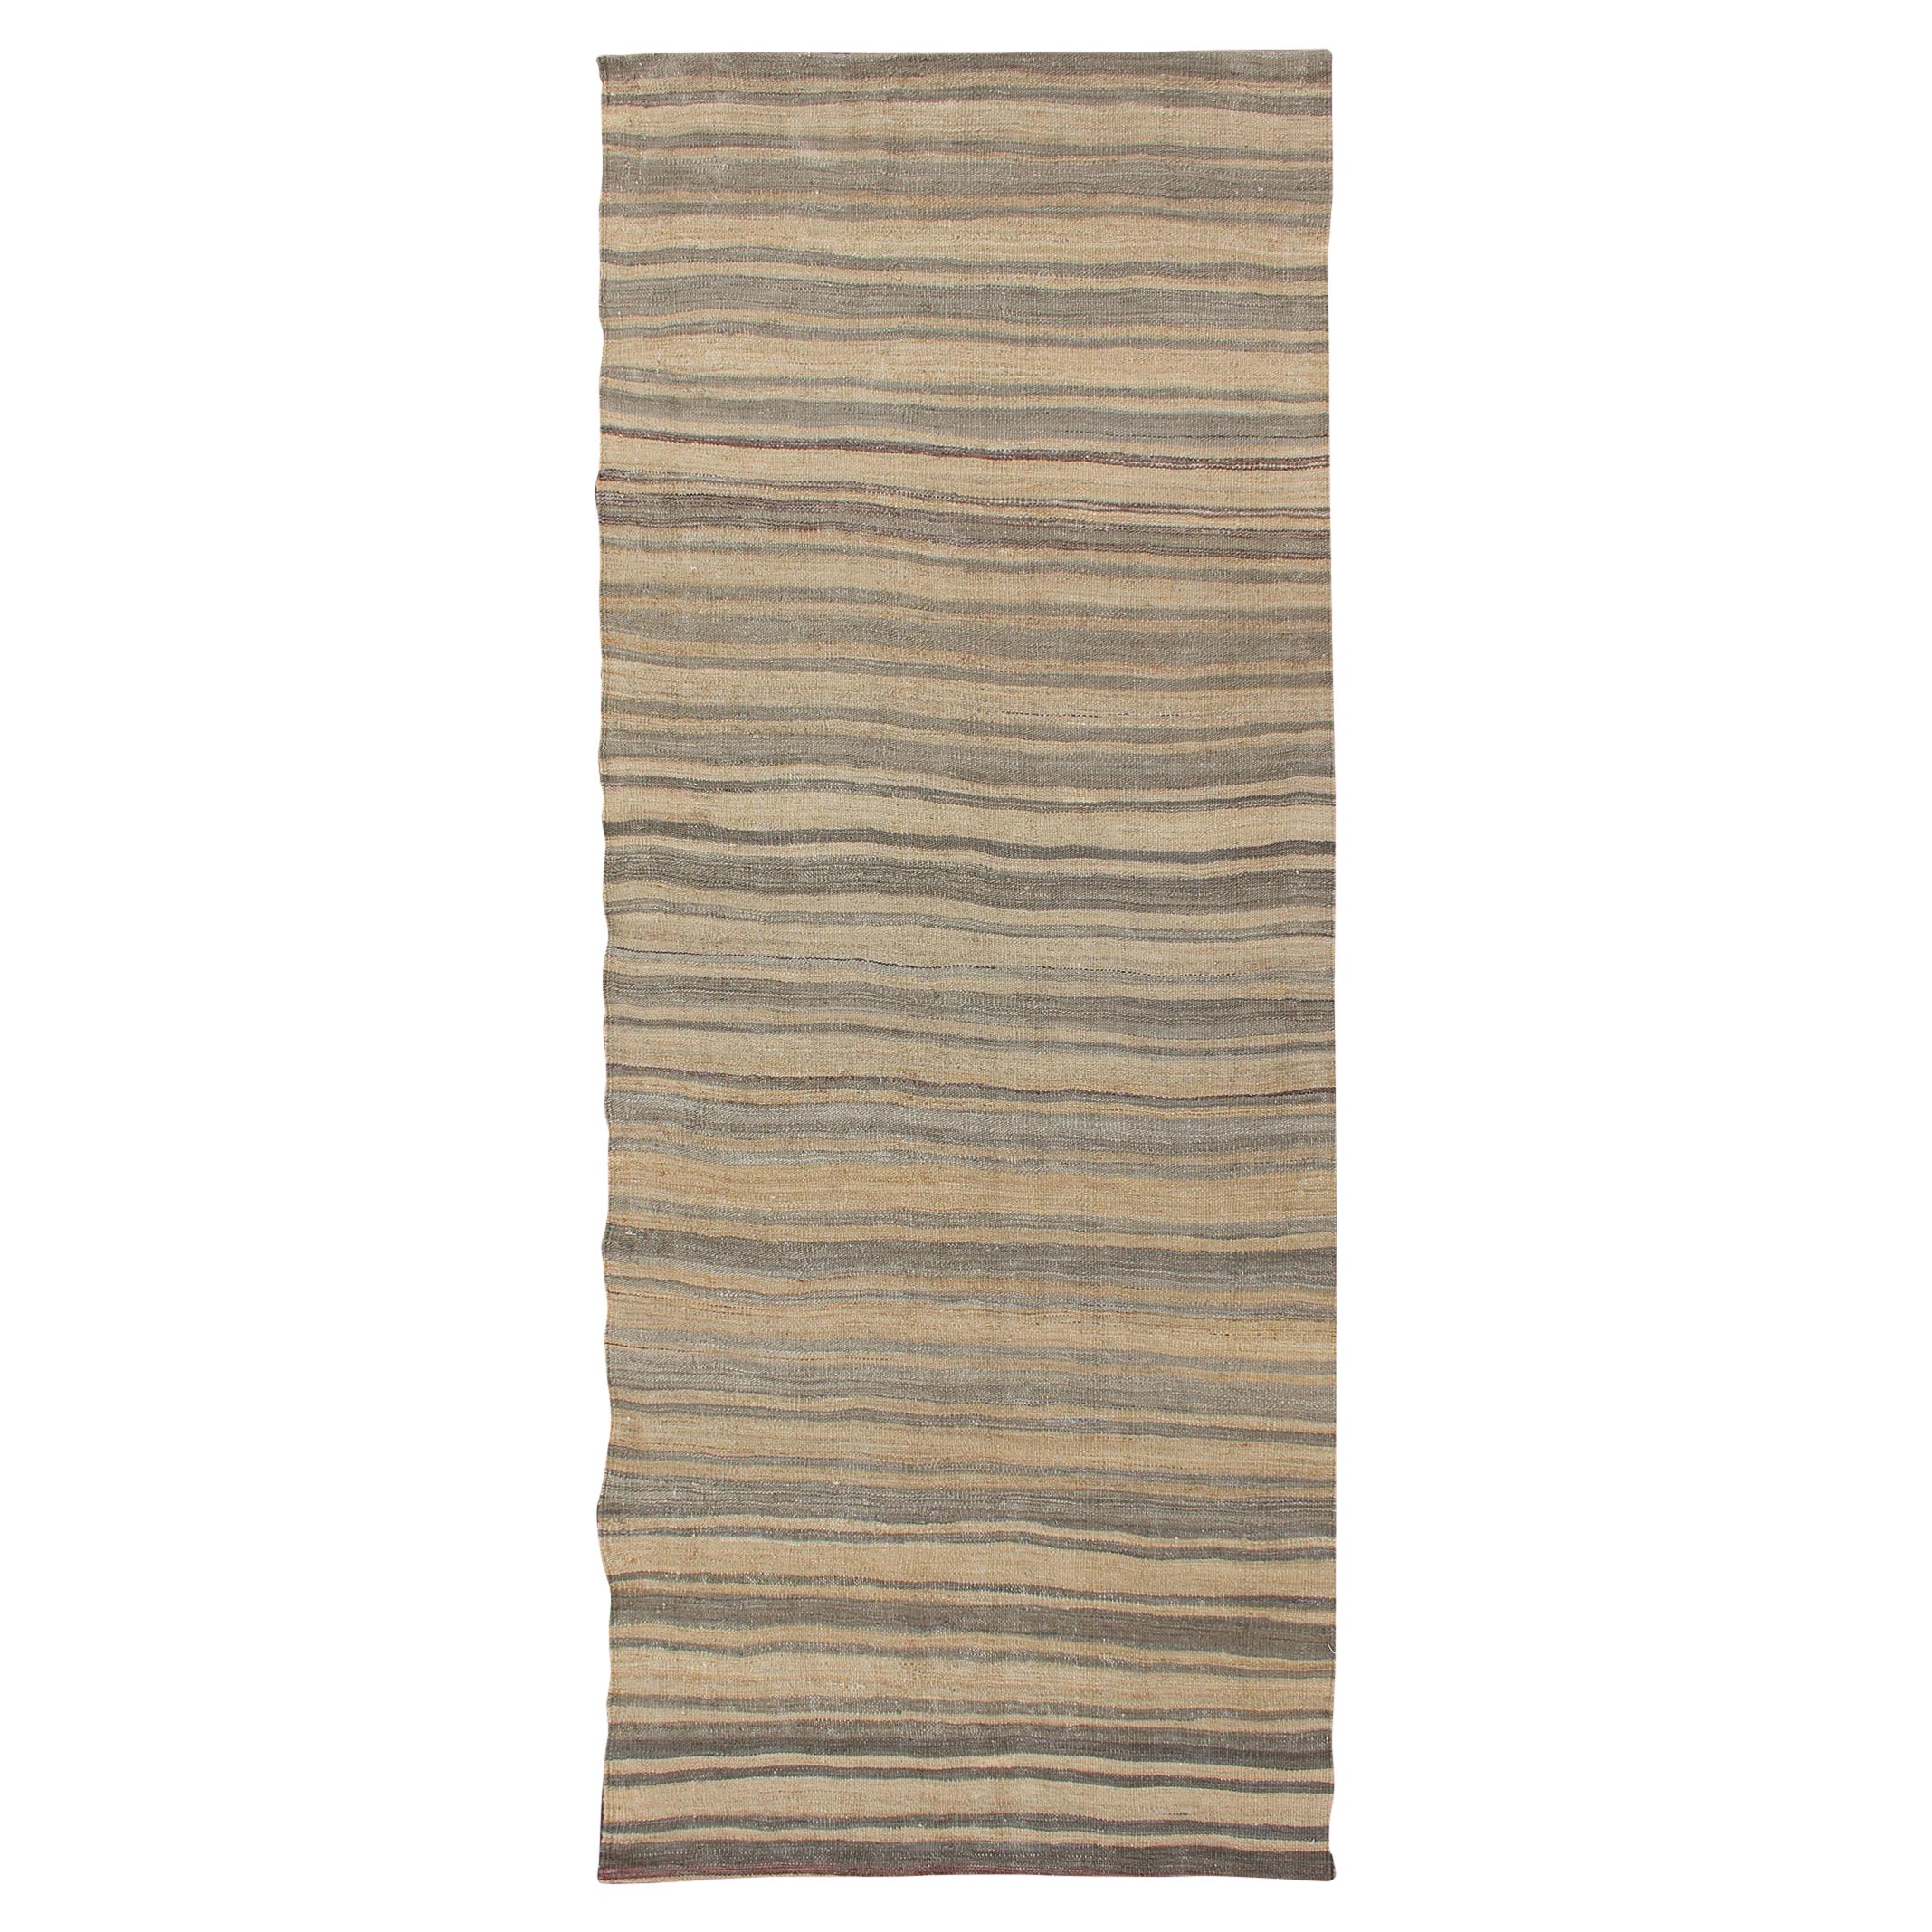 Vintage Turkish Kilim Runner with Stripes in Light Tan and Neutral Tones